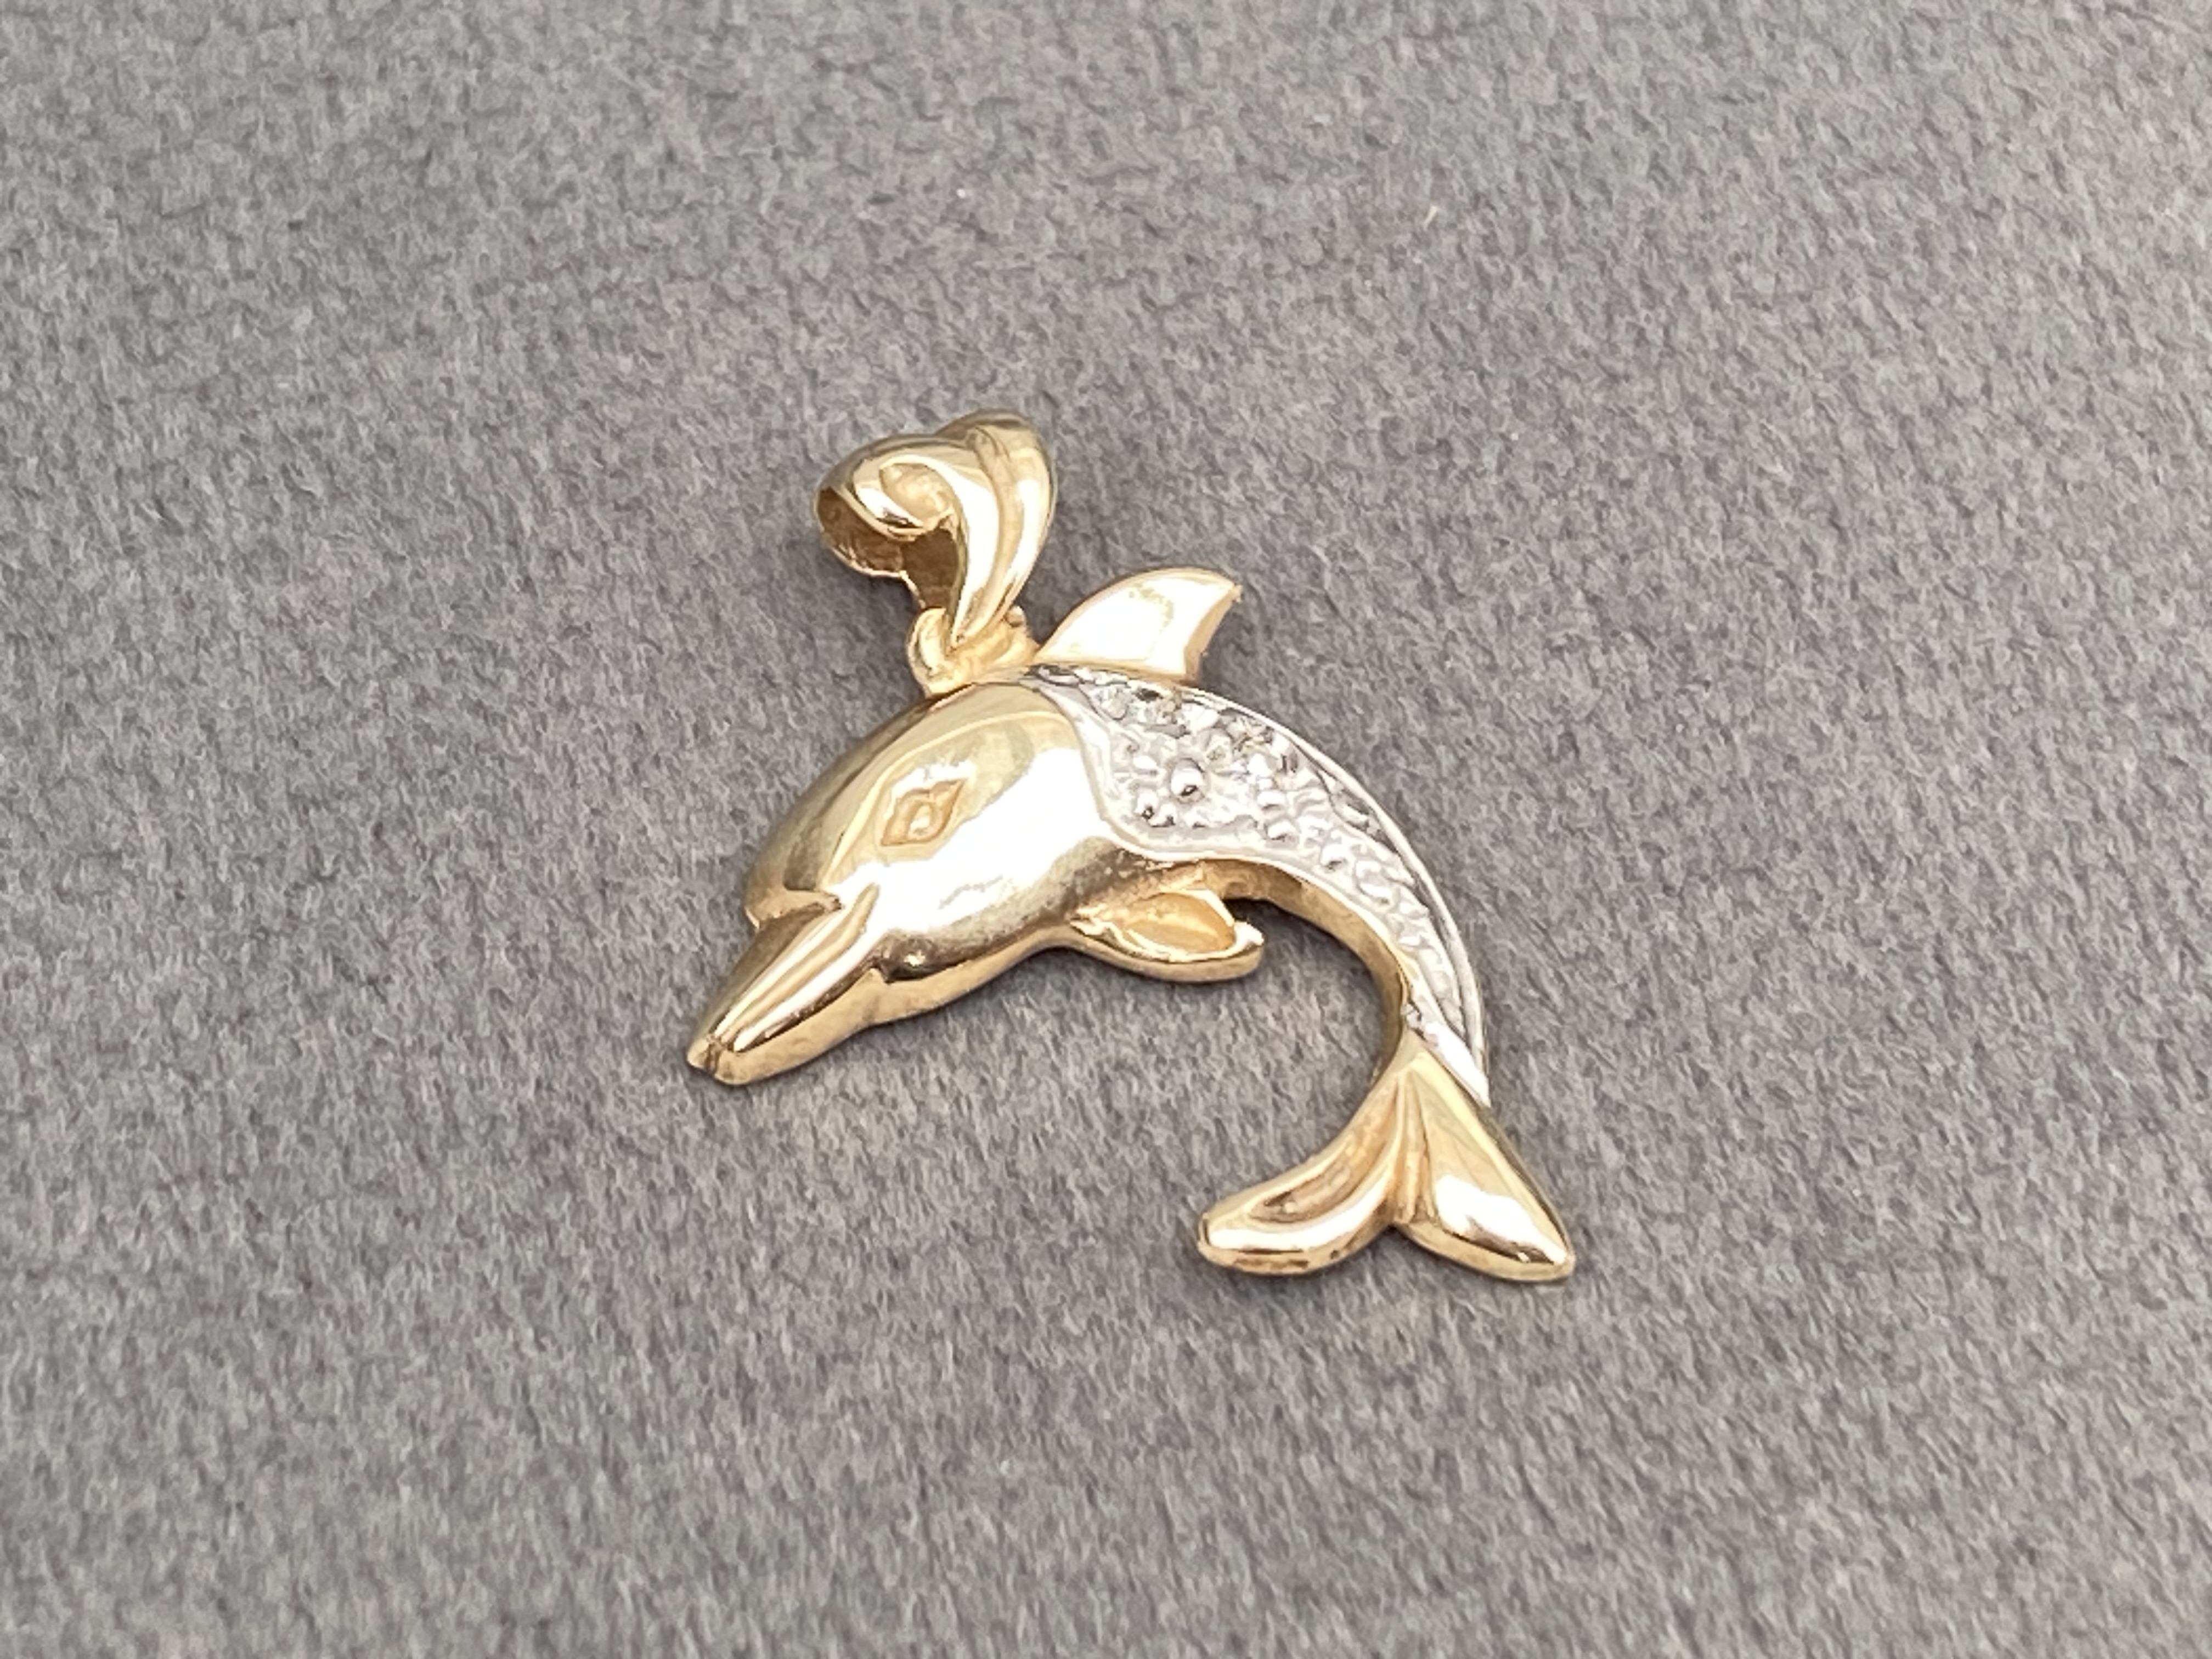 18ct dolphin pendant weighing 1.2 grams